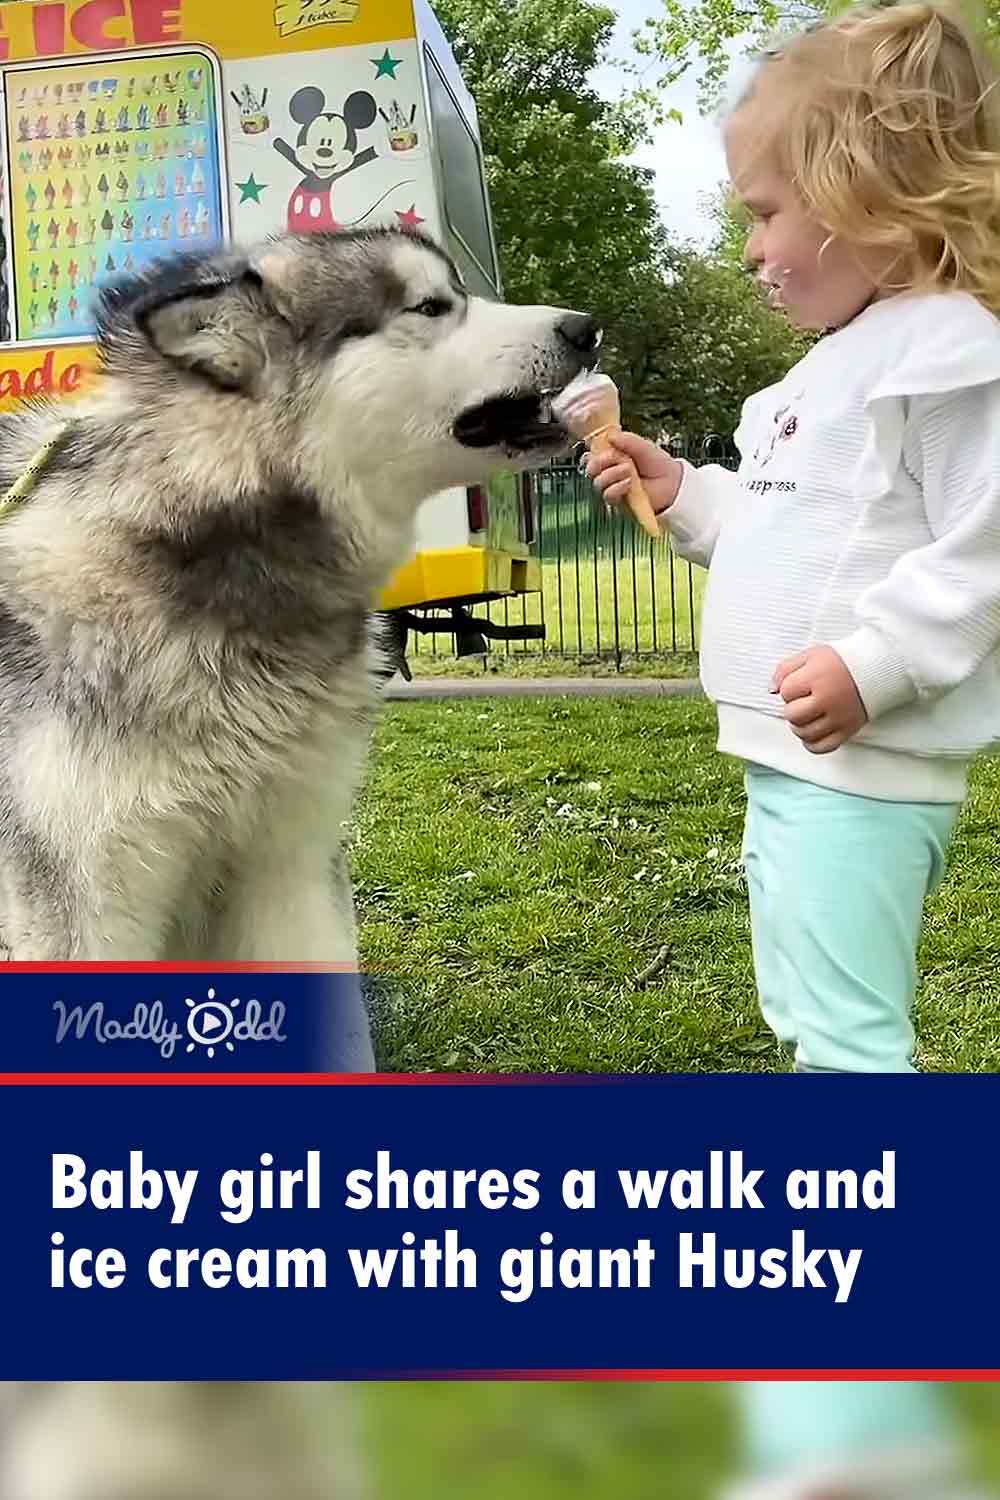 Baby girl shares a walk and ice cream with giant Husky